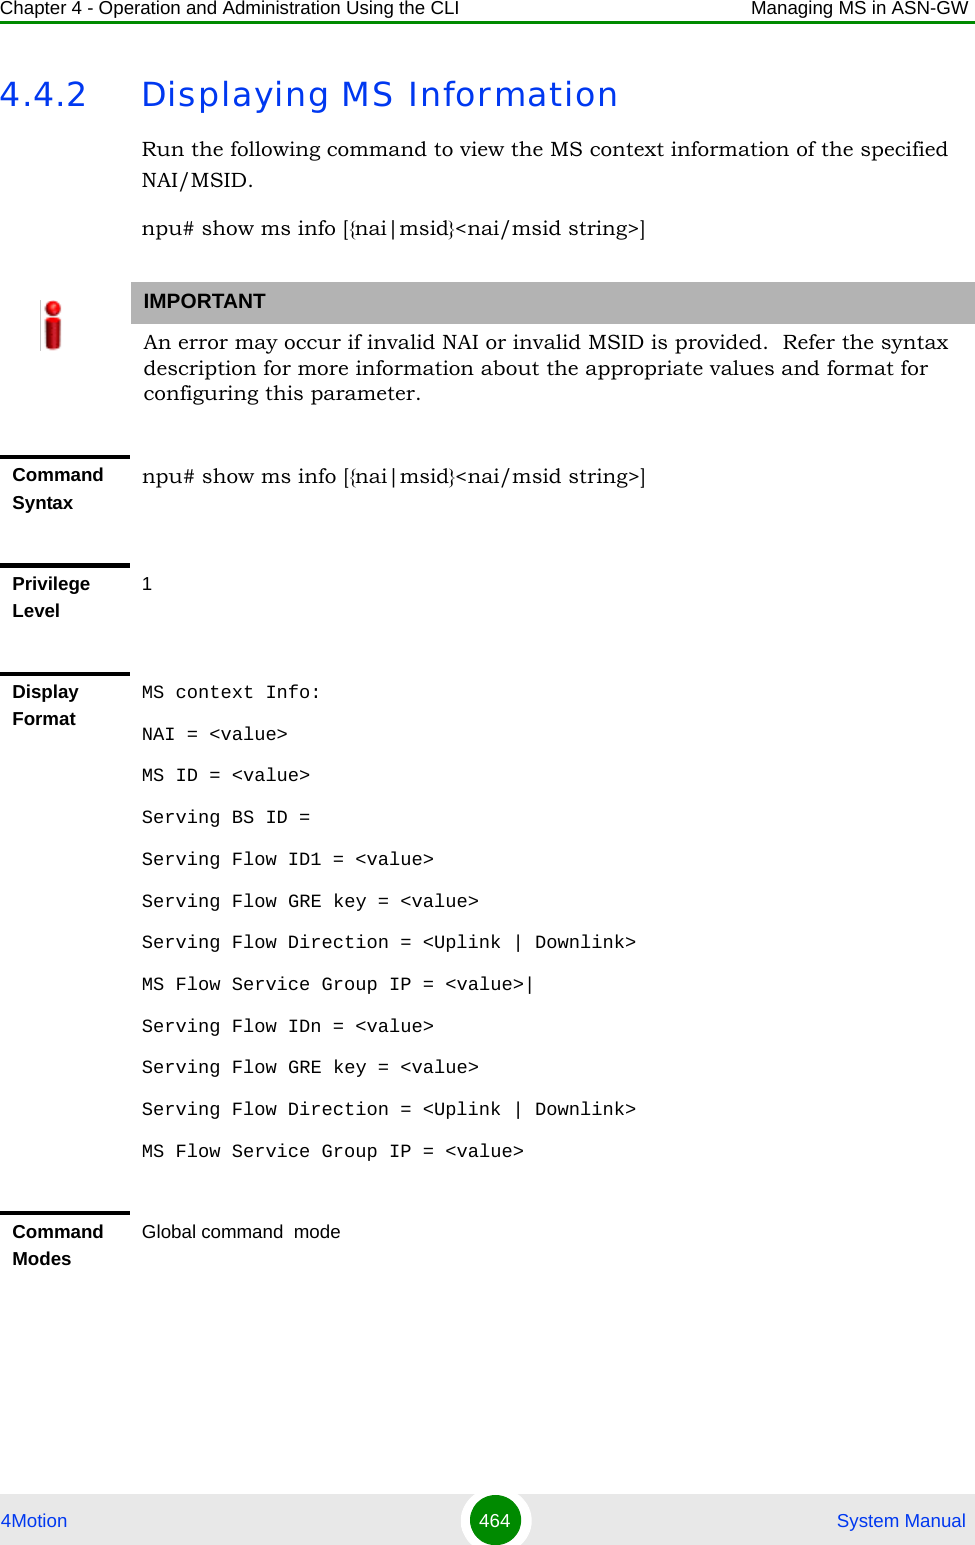 Chapter 4 - Operation and Administration Using the CLI Managing MS in ASN-GW4Motion 464  System Manual4.4.2 Displaying MS InformationRun the following command to view the MS context information of the specified NAI/MSID. npu# show ms info [{nai|msid}&lt;nai/msid string&gt;]IMPORTANTAn error may occur if invalid NAI or invalid MSID is provided.  Refer the syntax description for more information about the appropriate values and format for configuring this parameter.Command Syntaxnpu# show ms info [{nai|msid}&lt;nai/msid string&gt;]Privilege Level1Display FormatMS context Info: NAI = &lt;value&gt;MS ID = &lt;value&gt;Serving BS ID = Serving Flow ID1 = &lt;value&gt;Serving Flow GRE key = &lt;value&gt;Serving Flow Direction = &lt;Uplink | Downlink&gt;MS Flow Service Group IP = &lt;value&gt;|Serving Flow IDn = &lt;value&gt;Serving Flow GRE key = &lt;value&gt;Serving Flow Direction = &lt;Uplink | Downlink&gt;MS Flow Service Group IP = &lt;value&gt;Command ModesGlobal command  mode